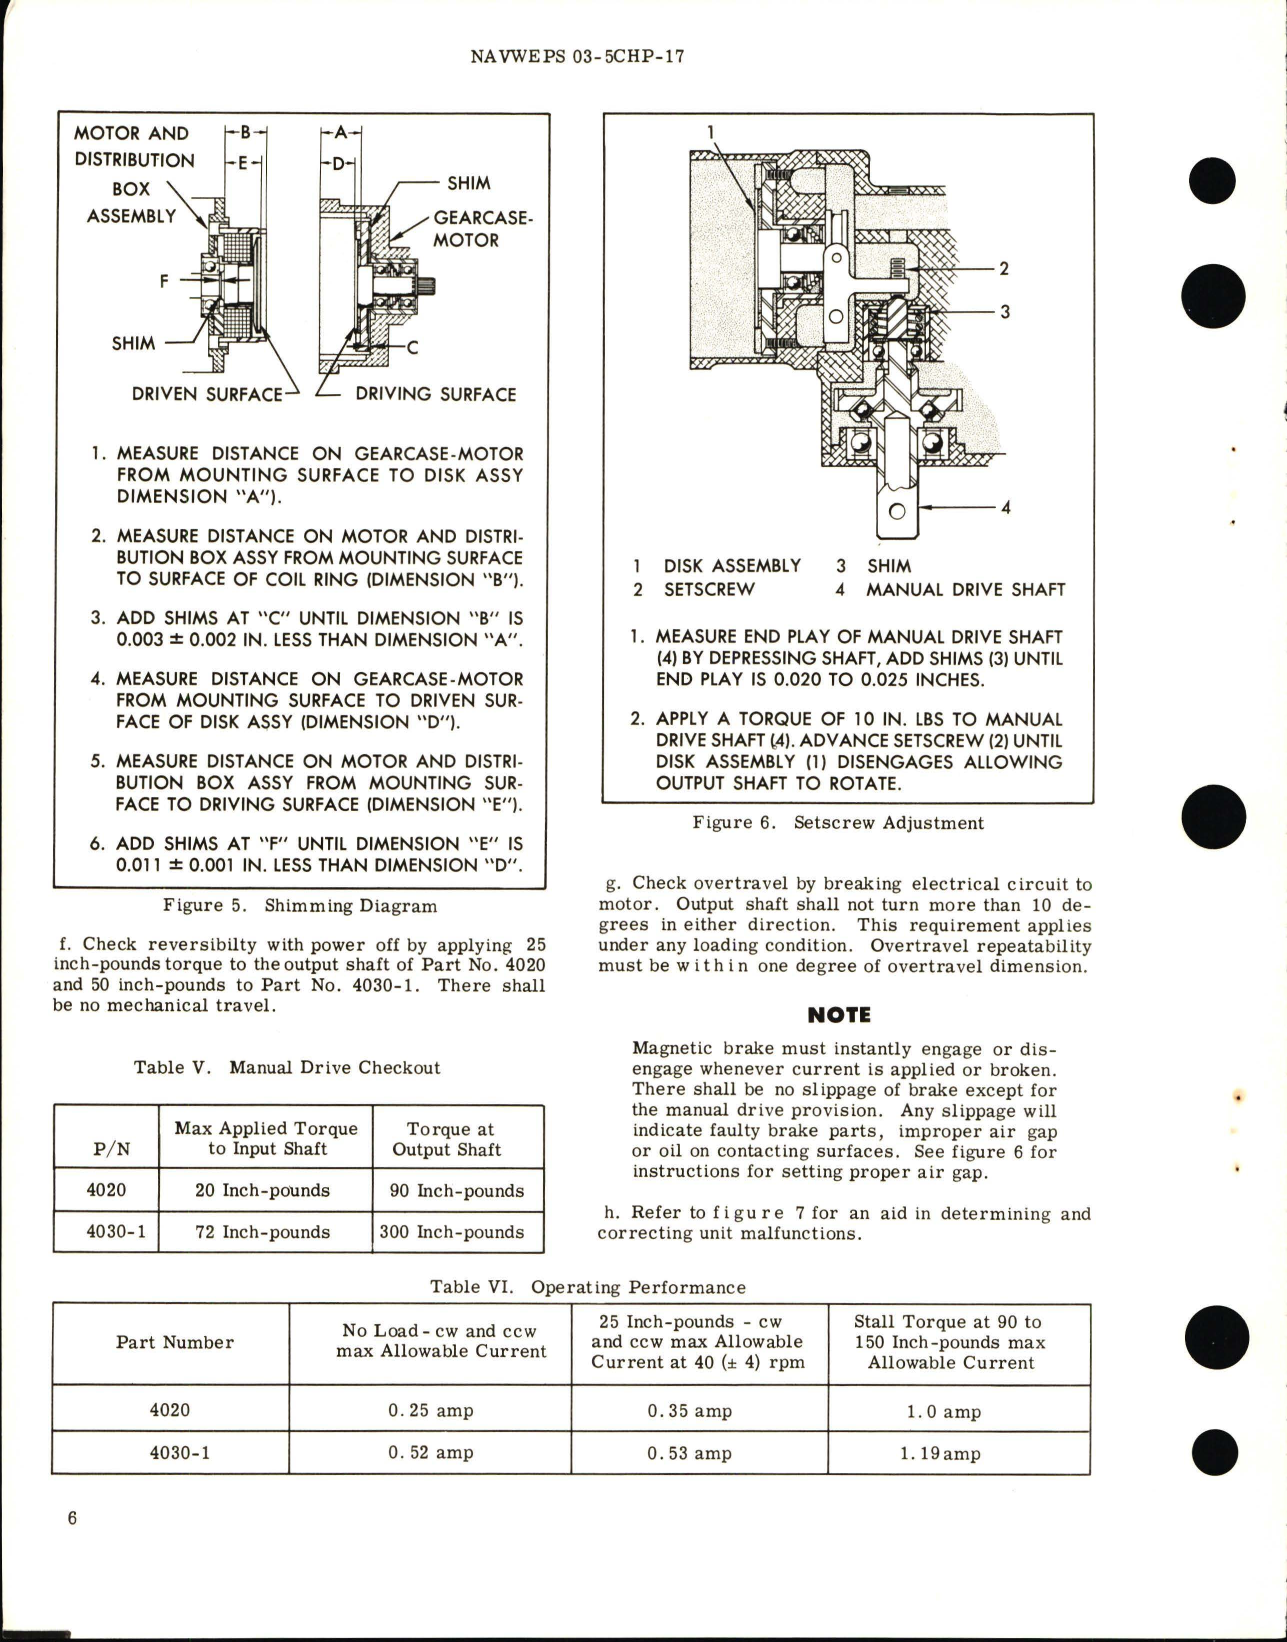 Sample page 8 from AirCorps Library document: Overhaul Instructions with Parts Breakdown for Electro-Mechanical Rotary Actuator